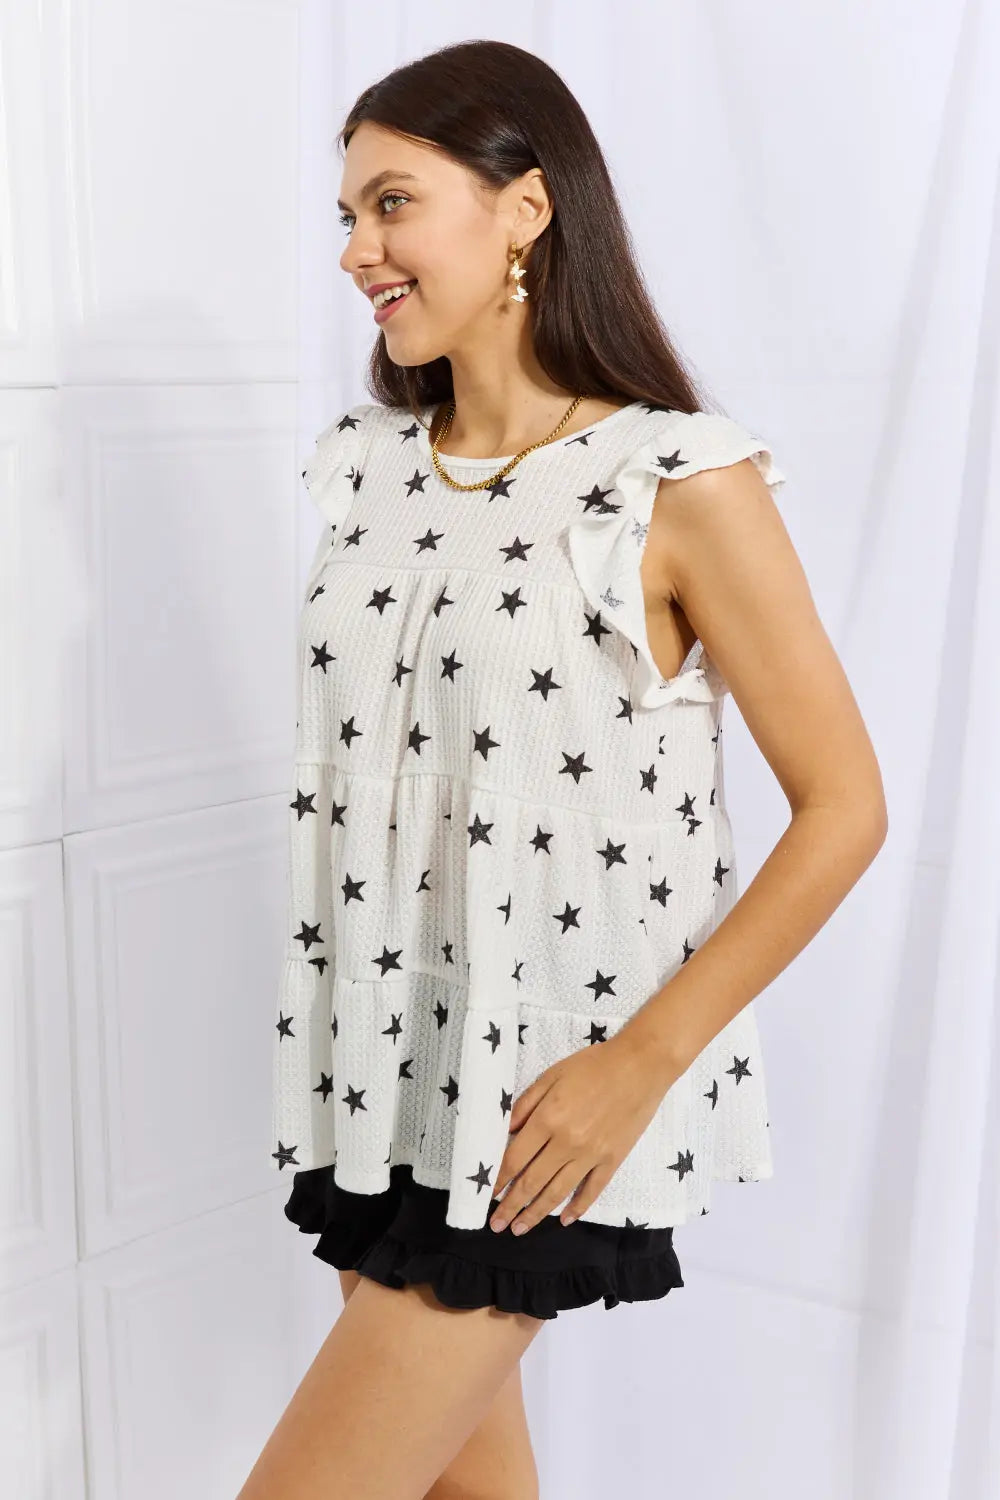 Heimish Shine Bright Full Size Butterfly Sleeve Star Print Top - Hot Trends